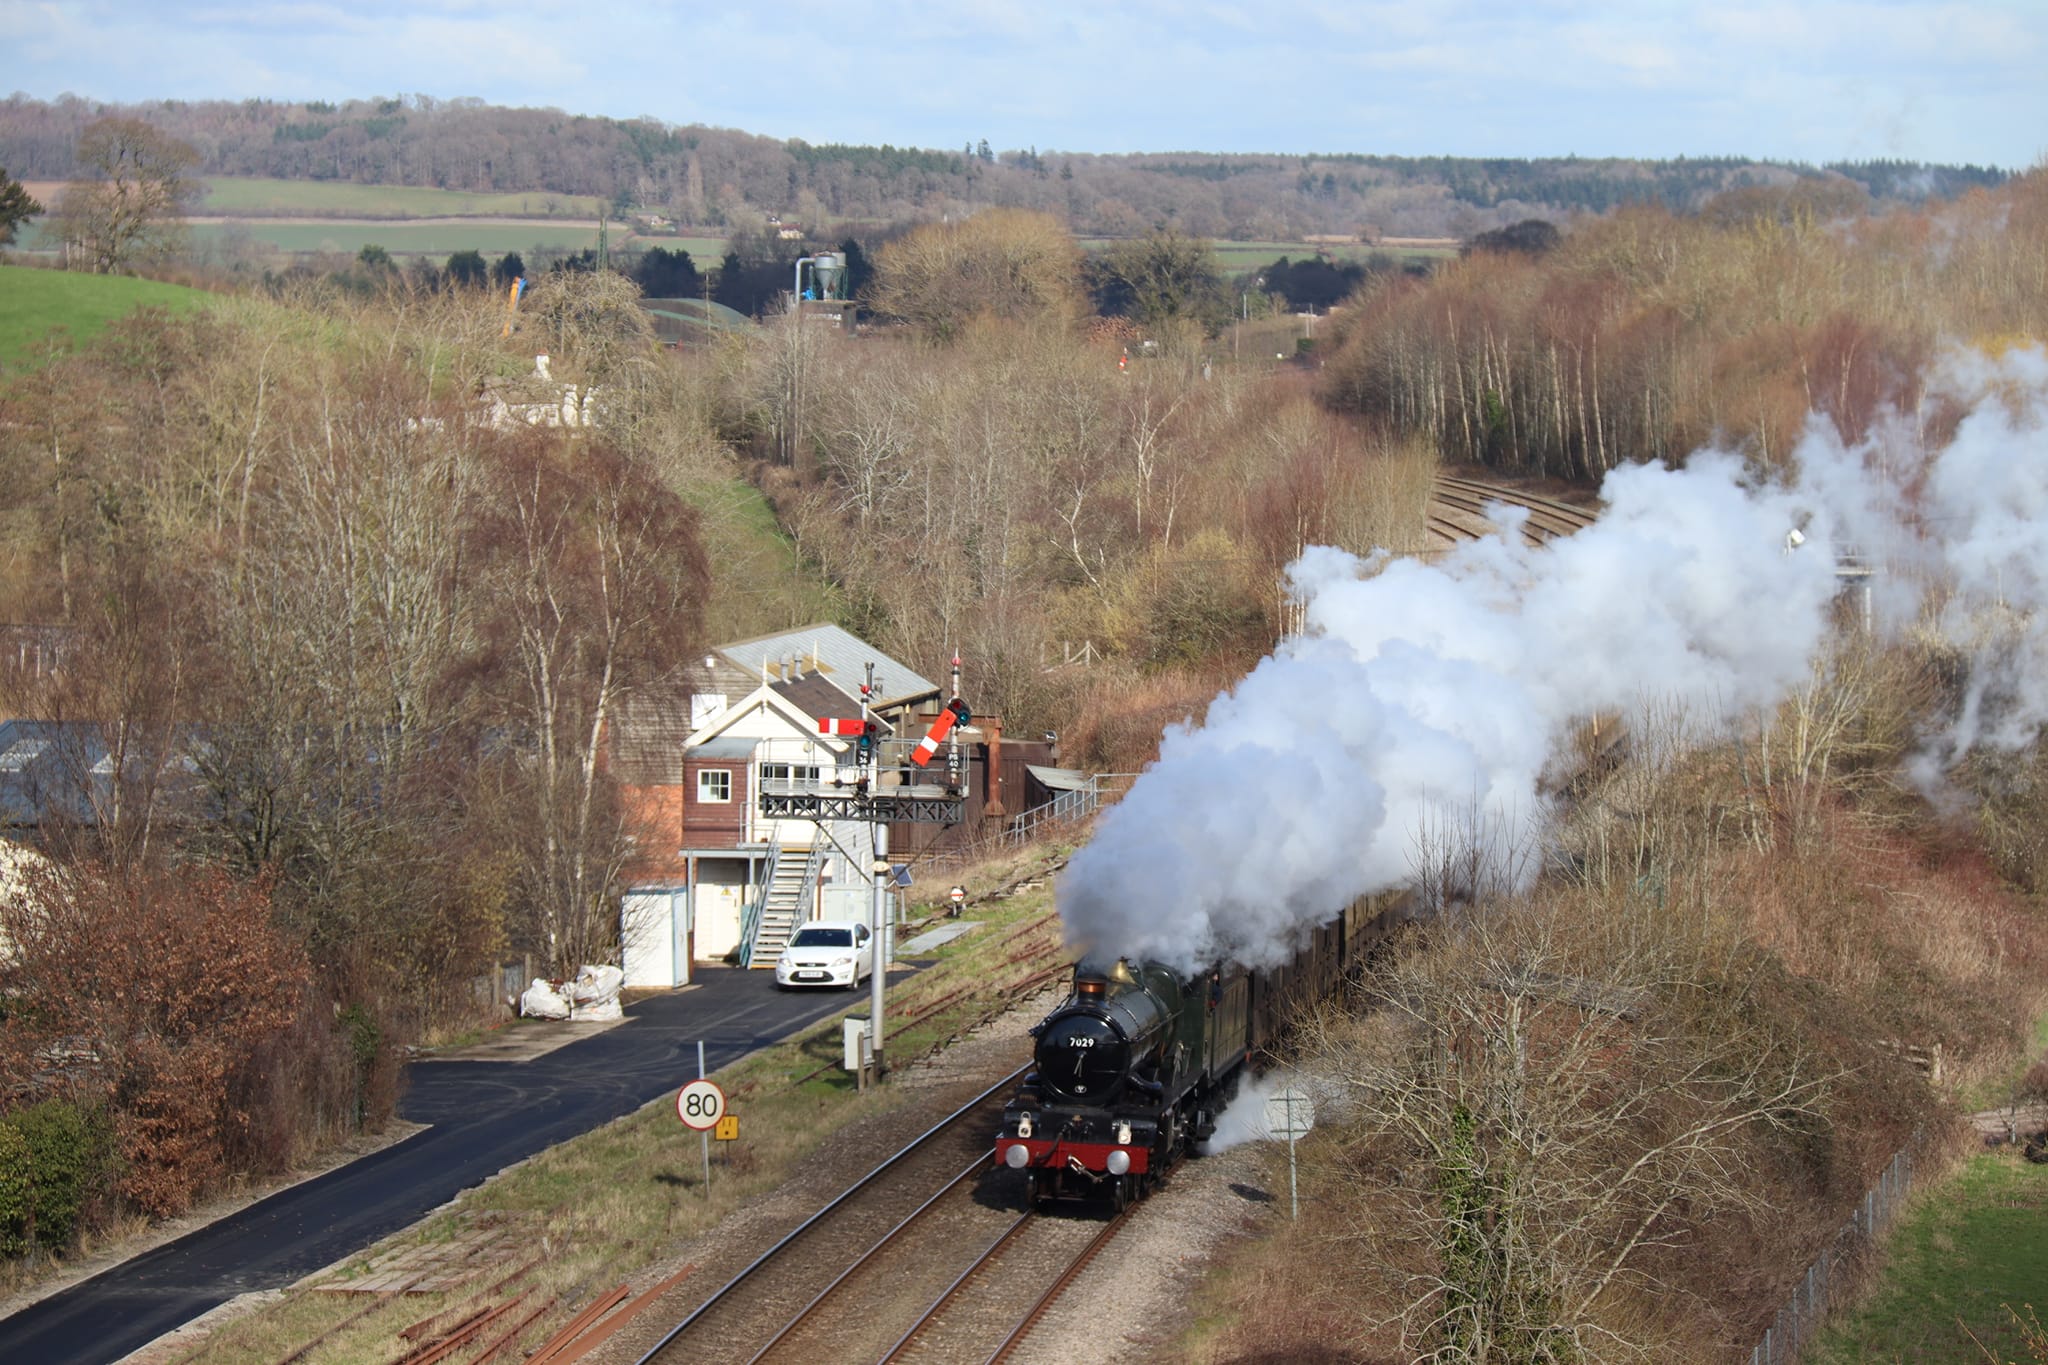 GALLERY | Four fantastic photos of the Welsh Marches Express Steam Train passing through the Herefordshire countryside